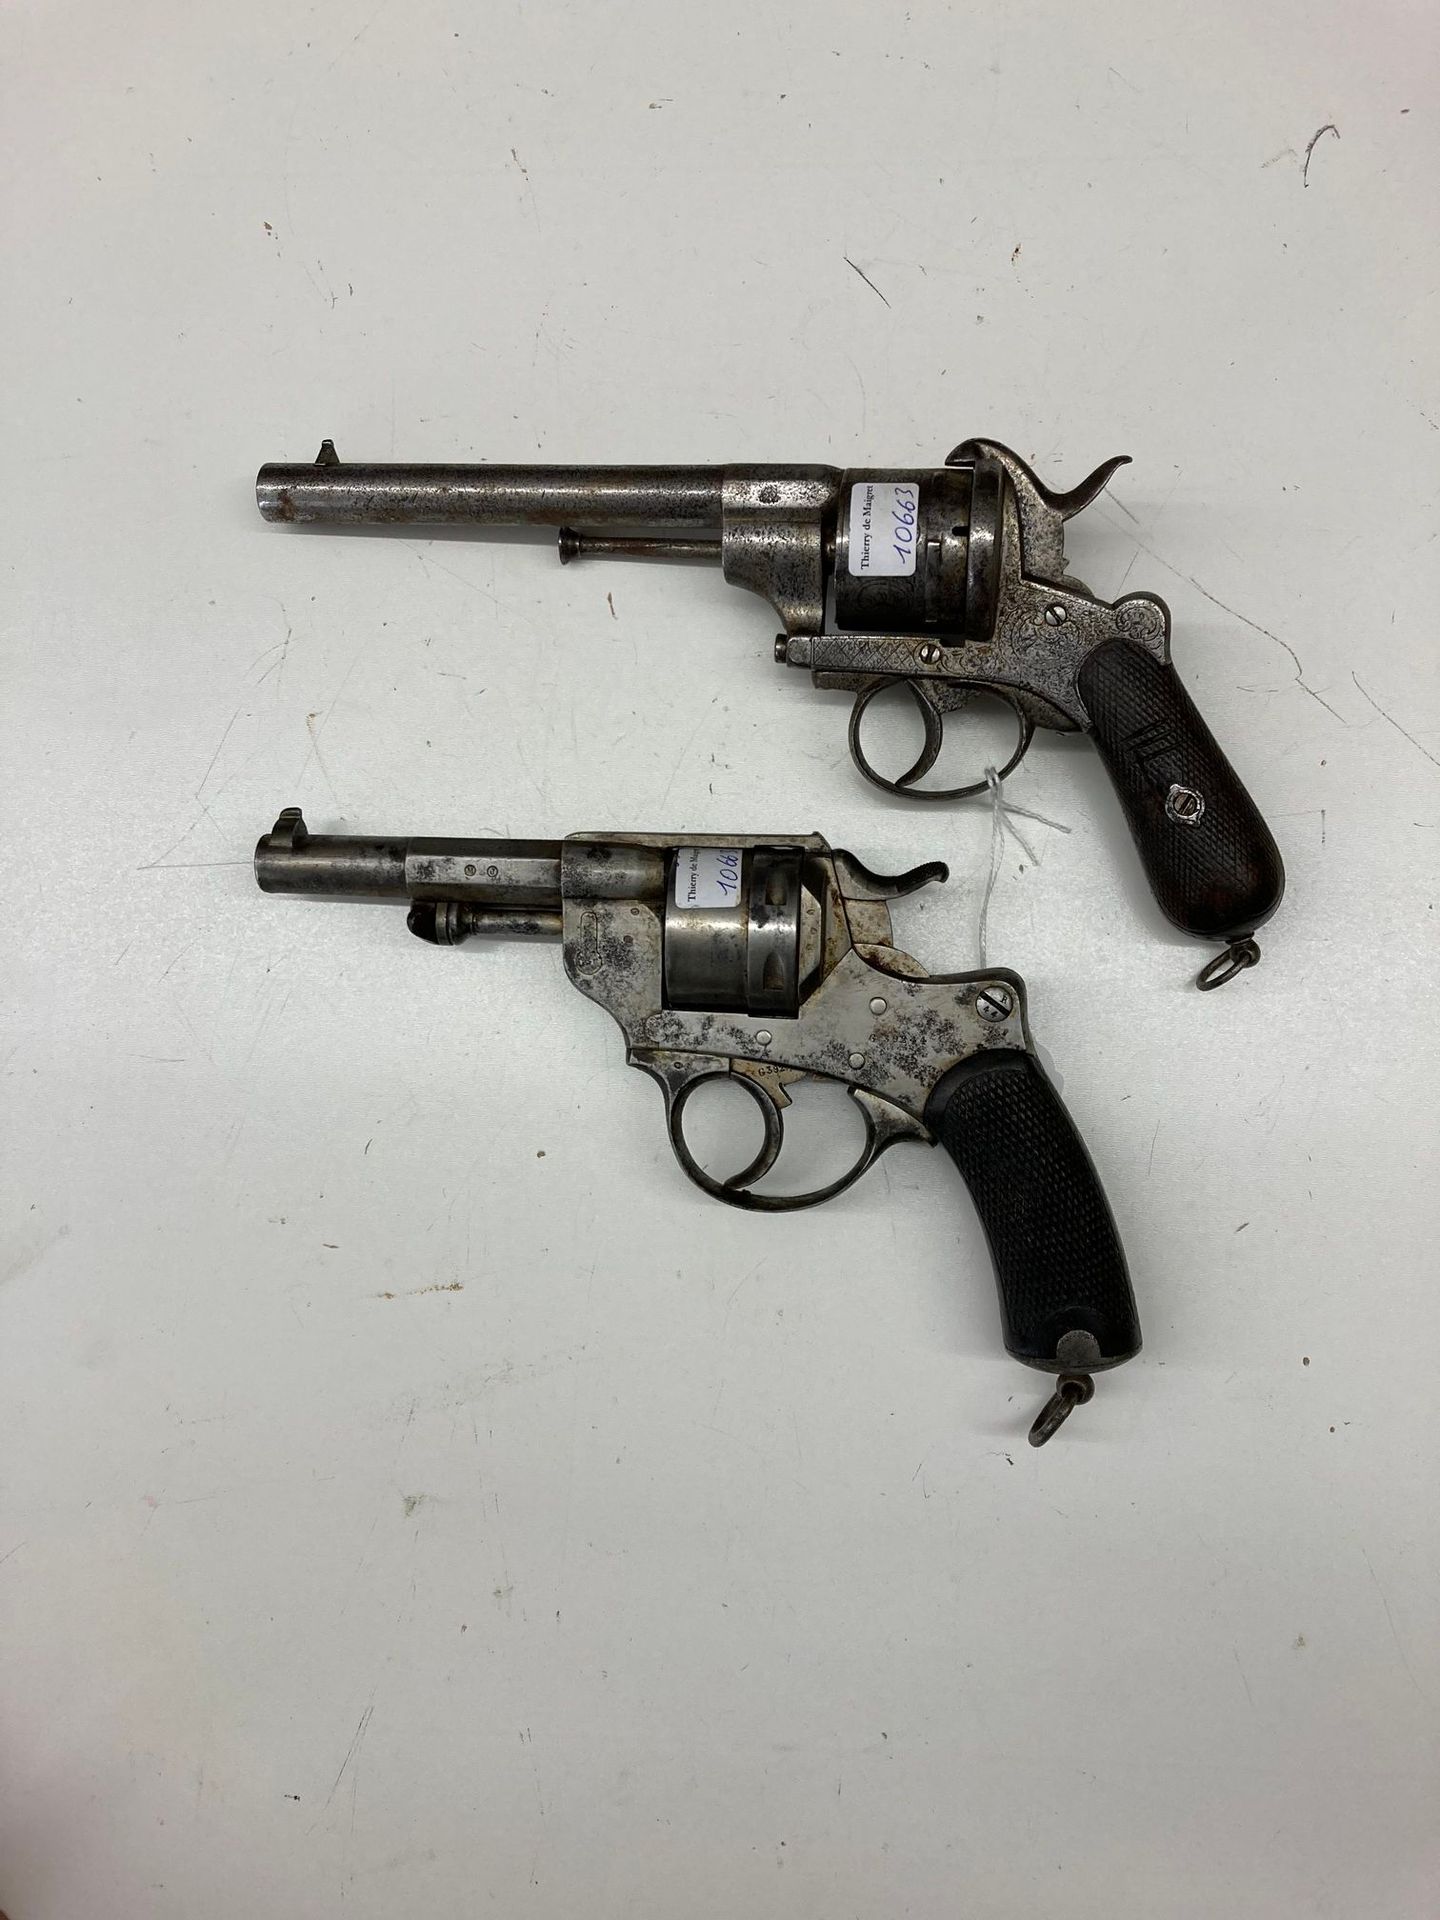 Null An ordinance revolver model 1873 dated: "S 1877" and numbered: "G 39244", A&hellip;